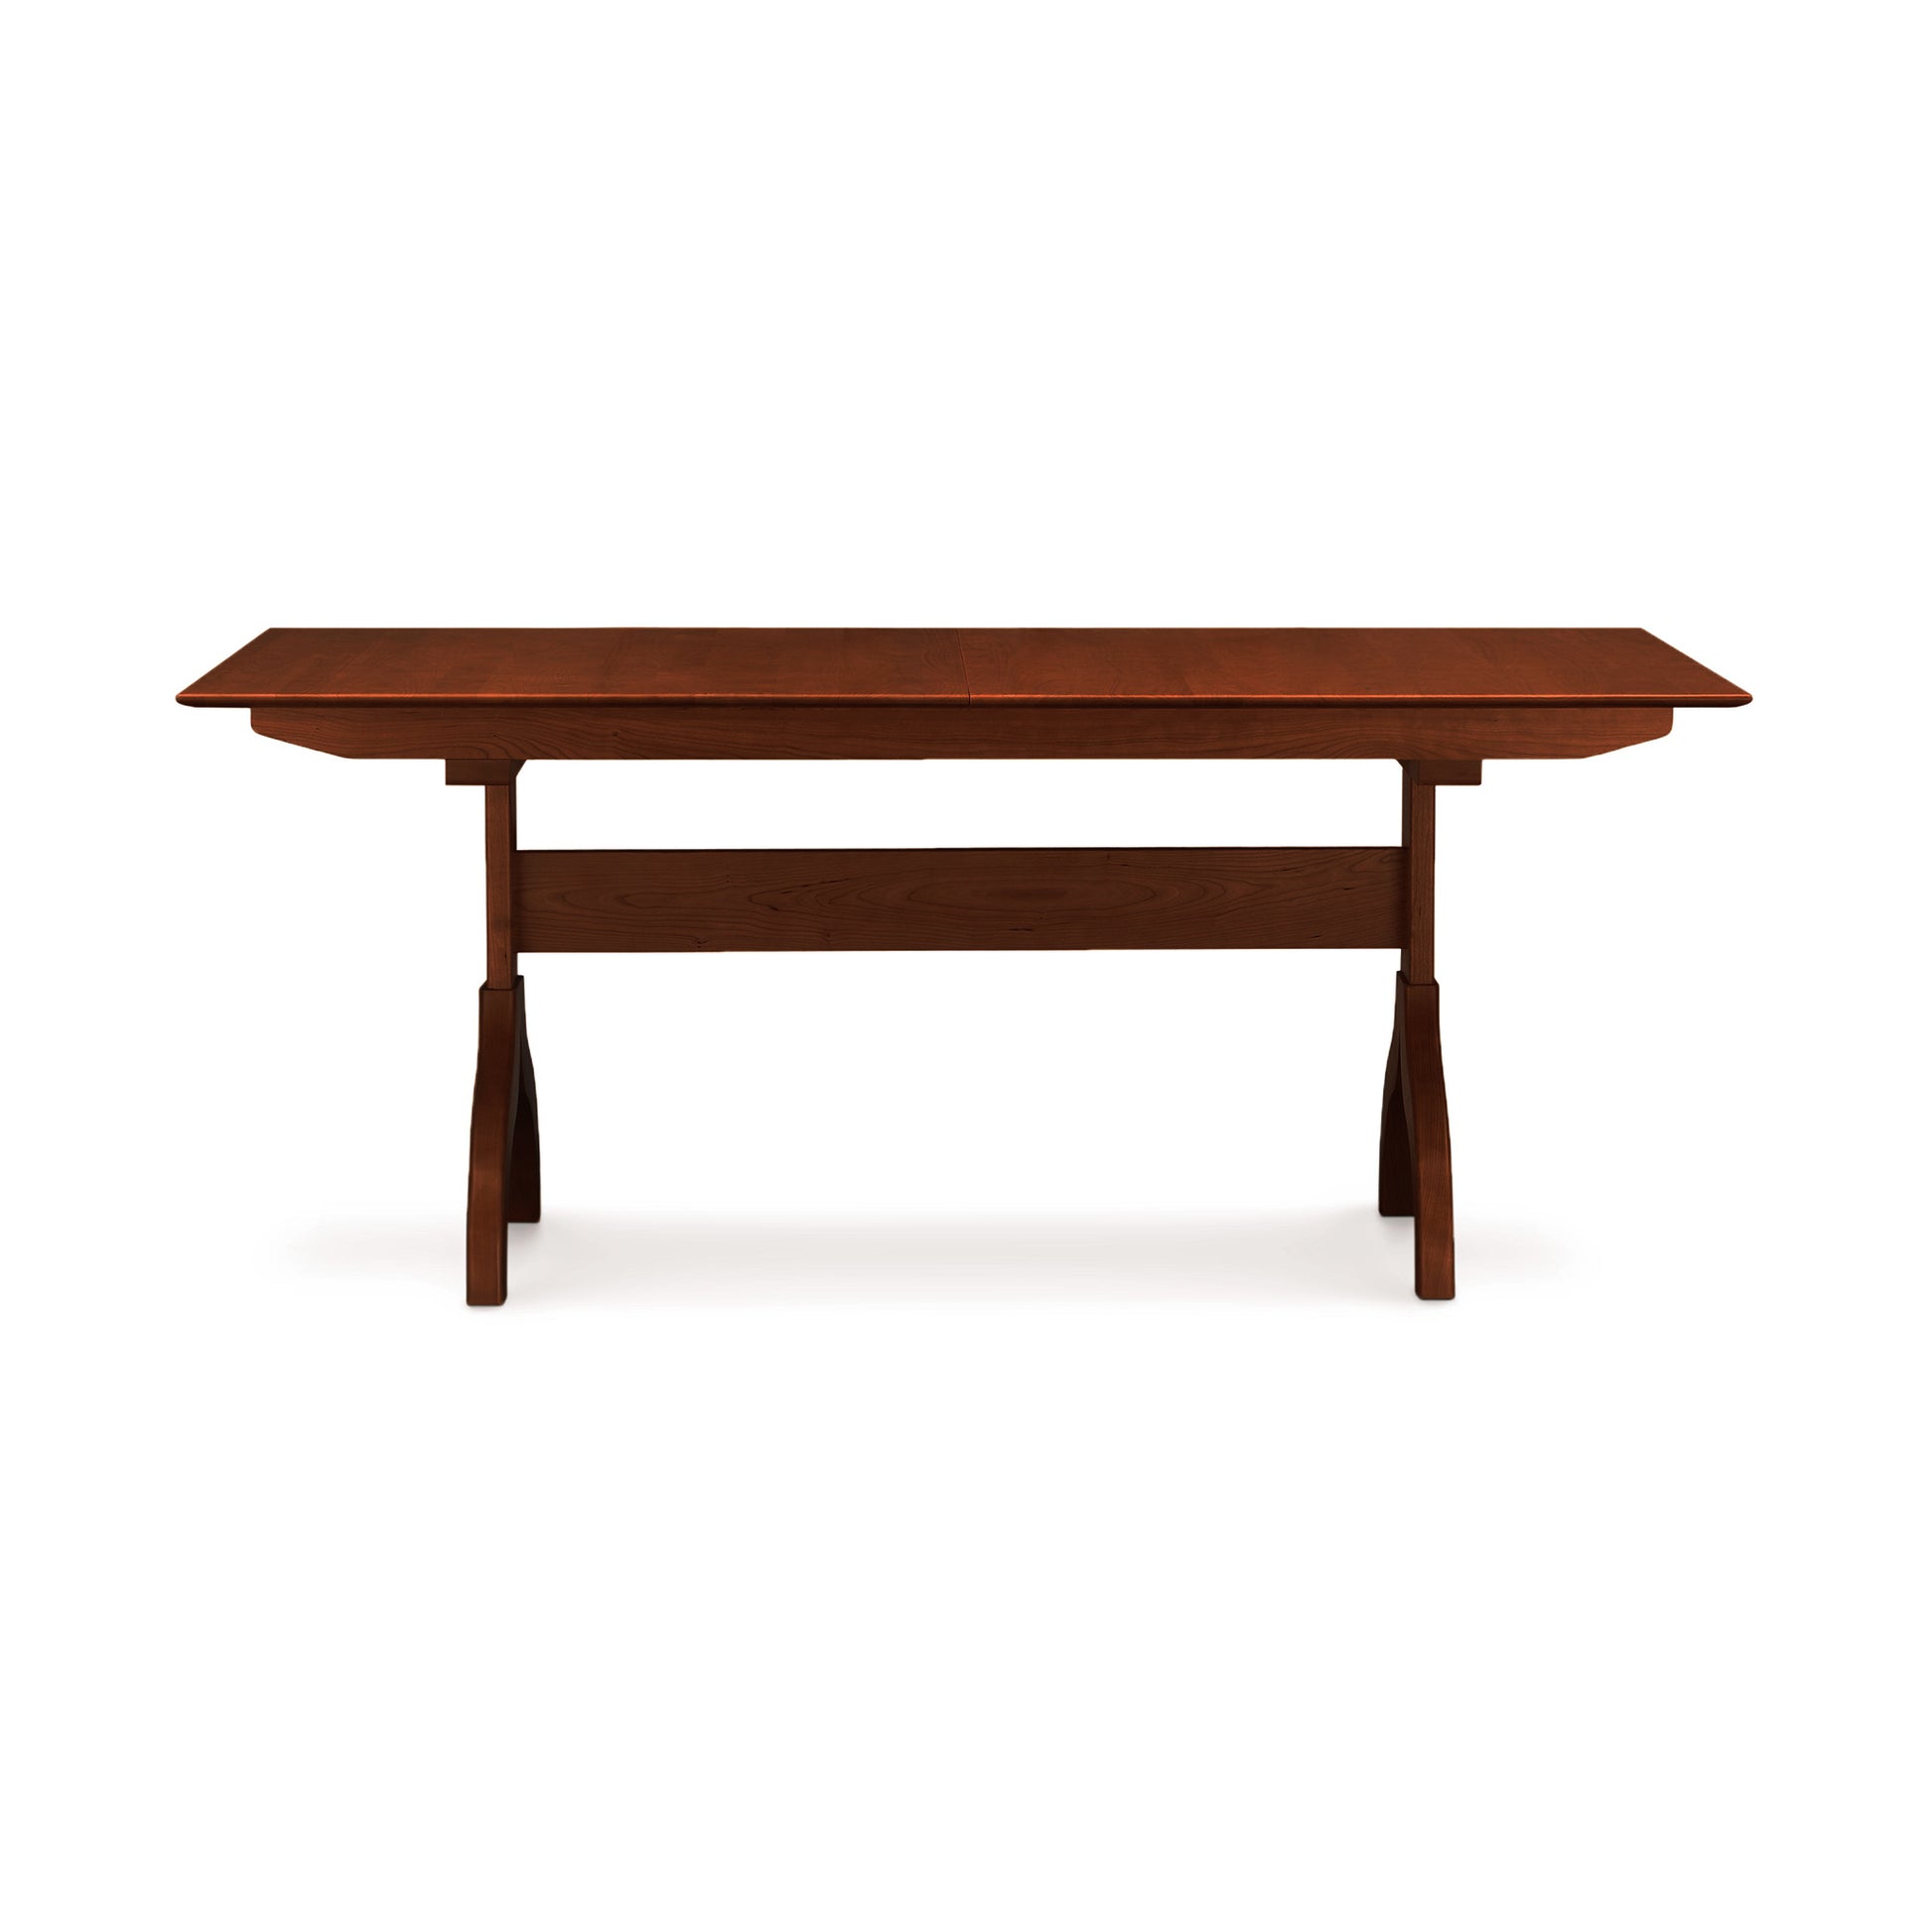 An extendable Sarah Shaker Trestle Extension Table from Copeland Furniture on a white background.